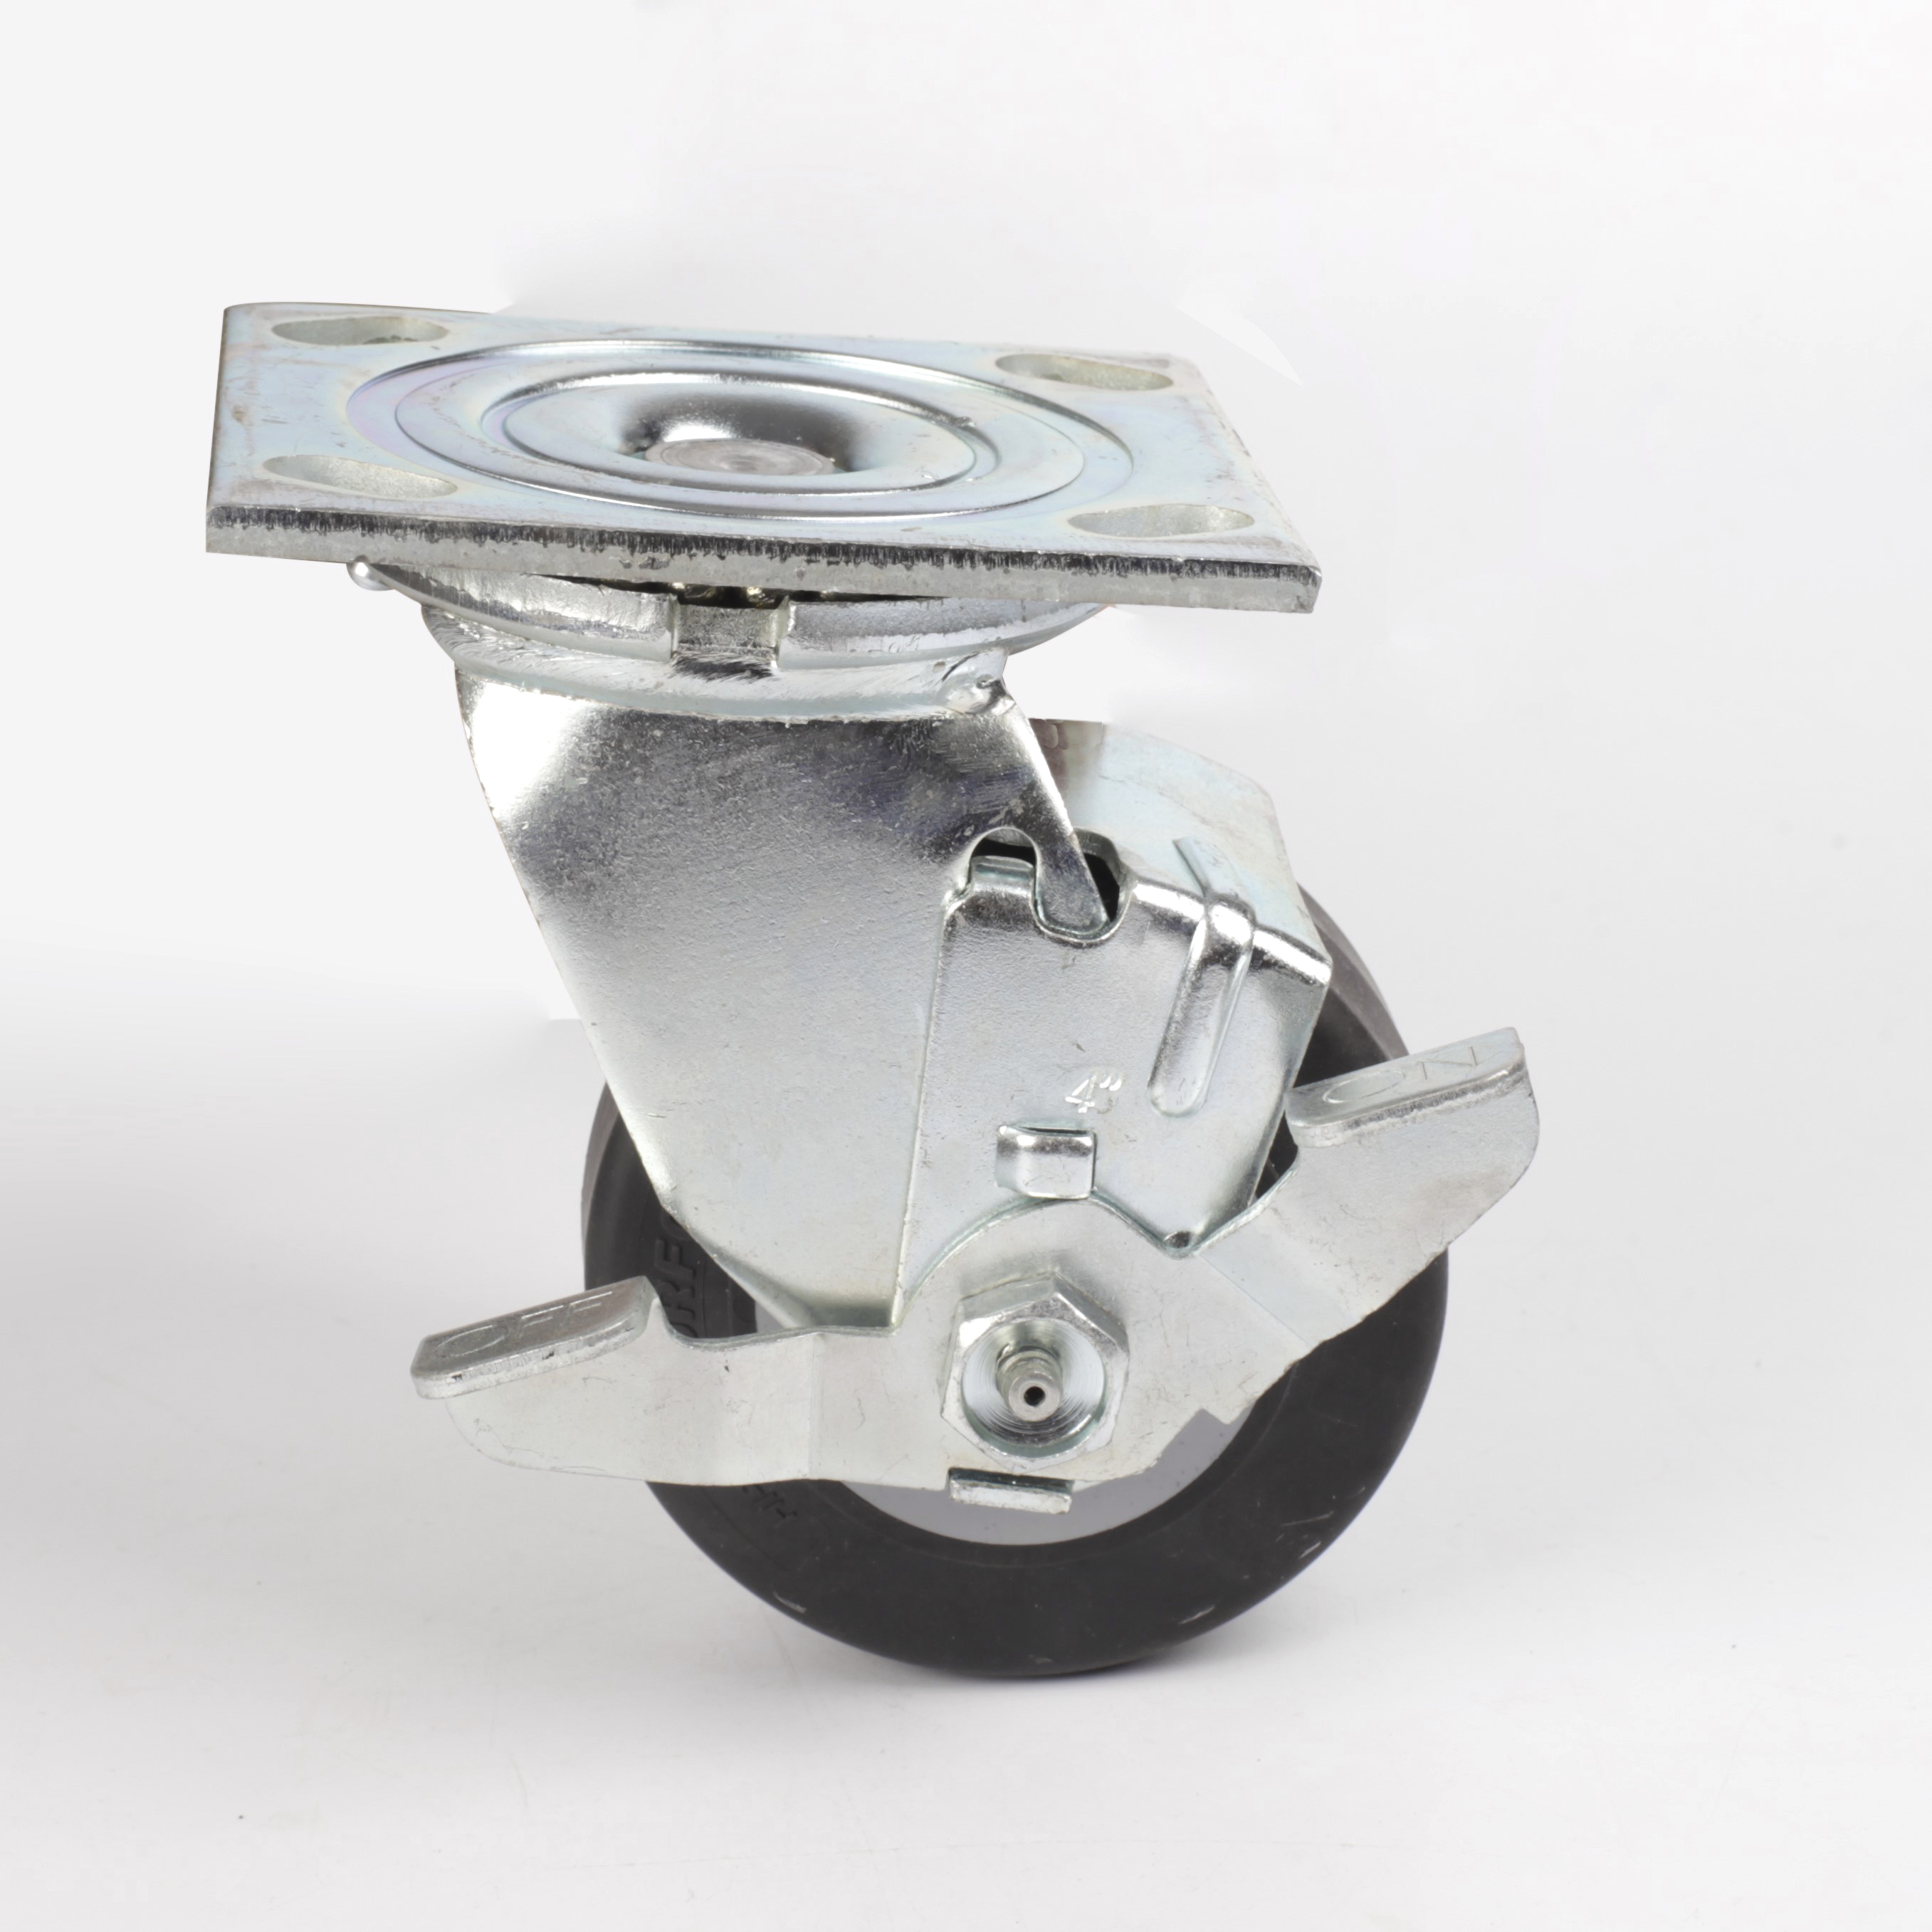 What are the Uses of Heavy-Duty Caster Wheels and Heavy-Duty Casters?